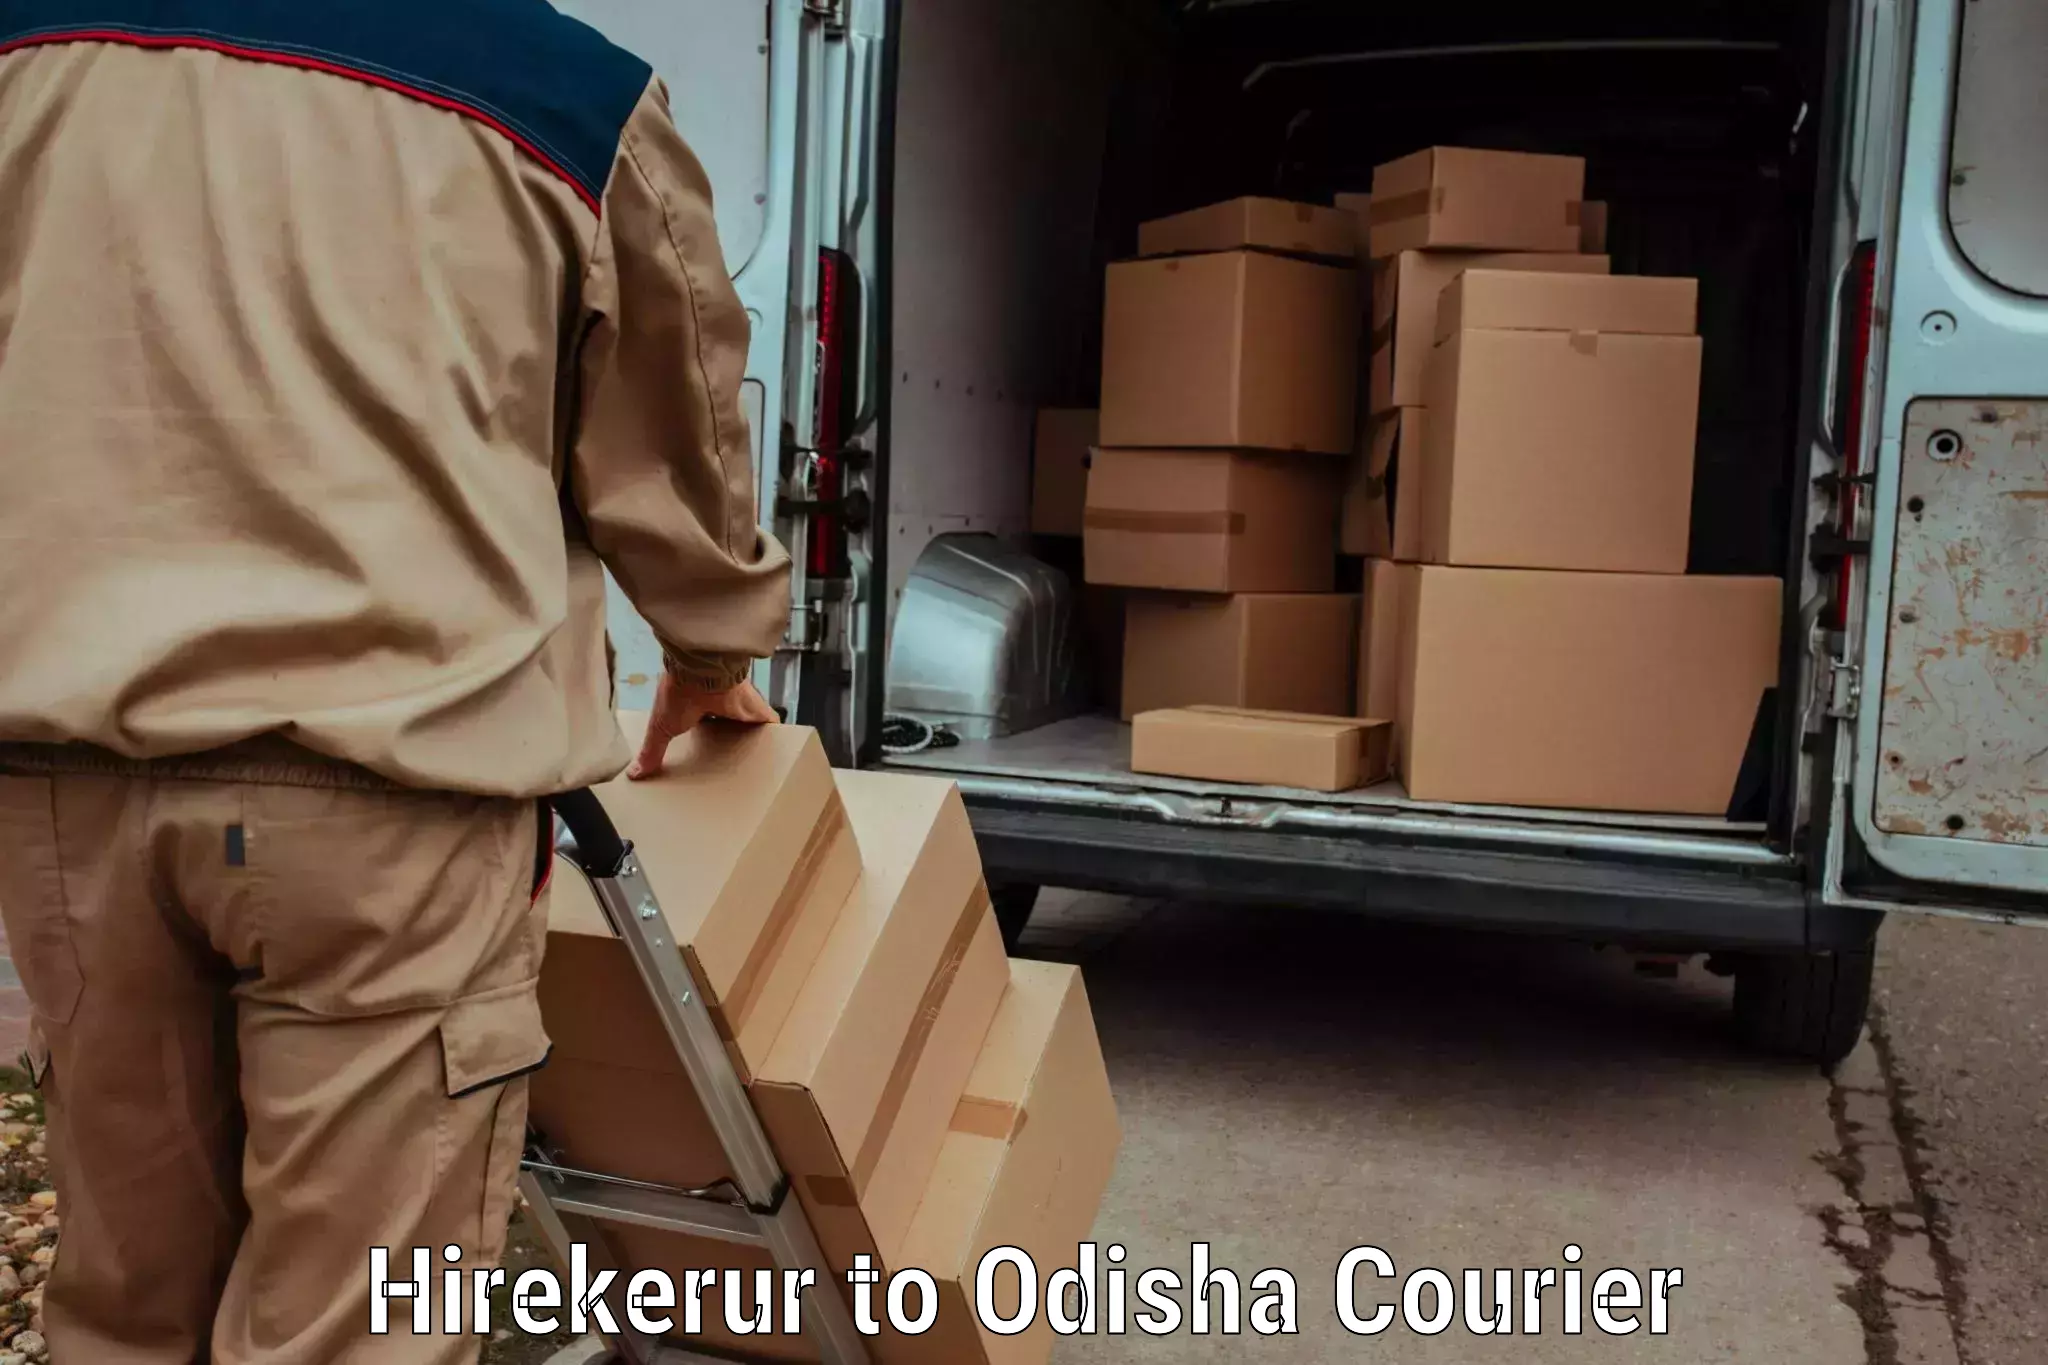 Global shipping networks Hirekerur to Sonapur